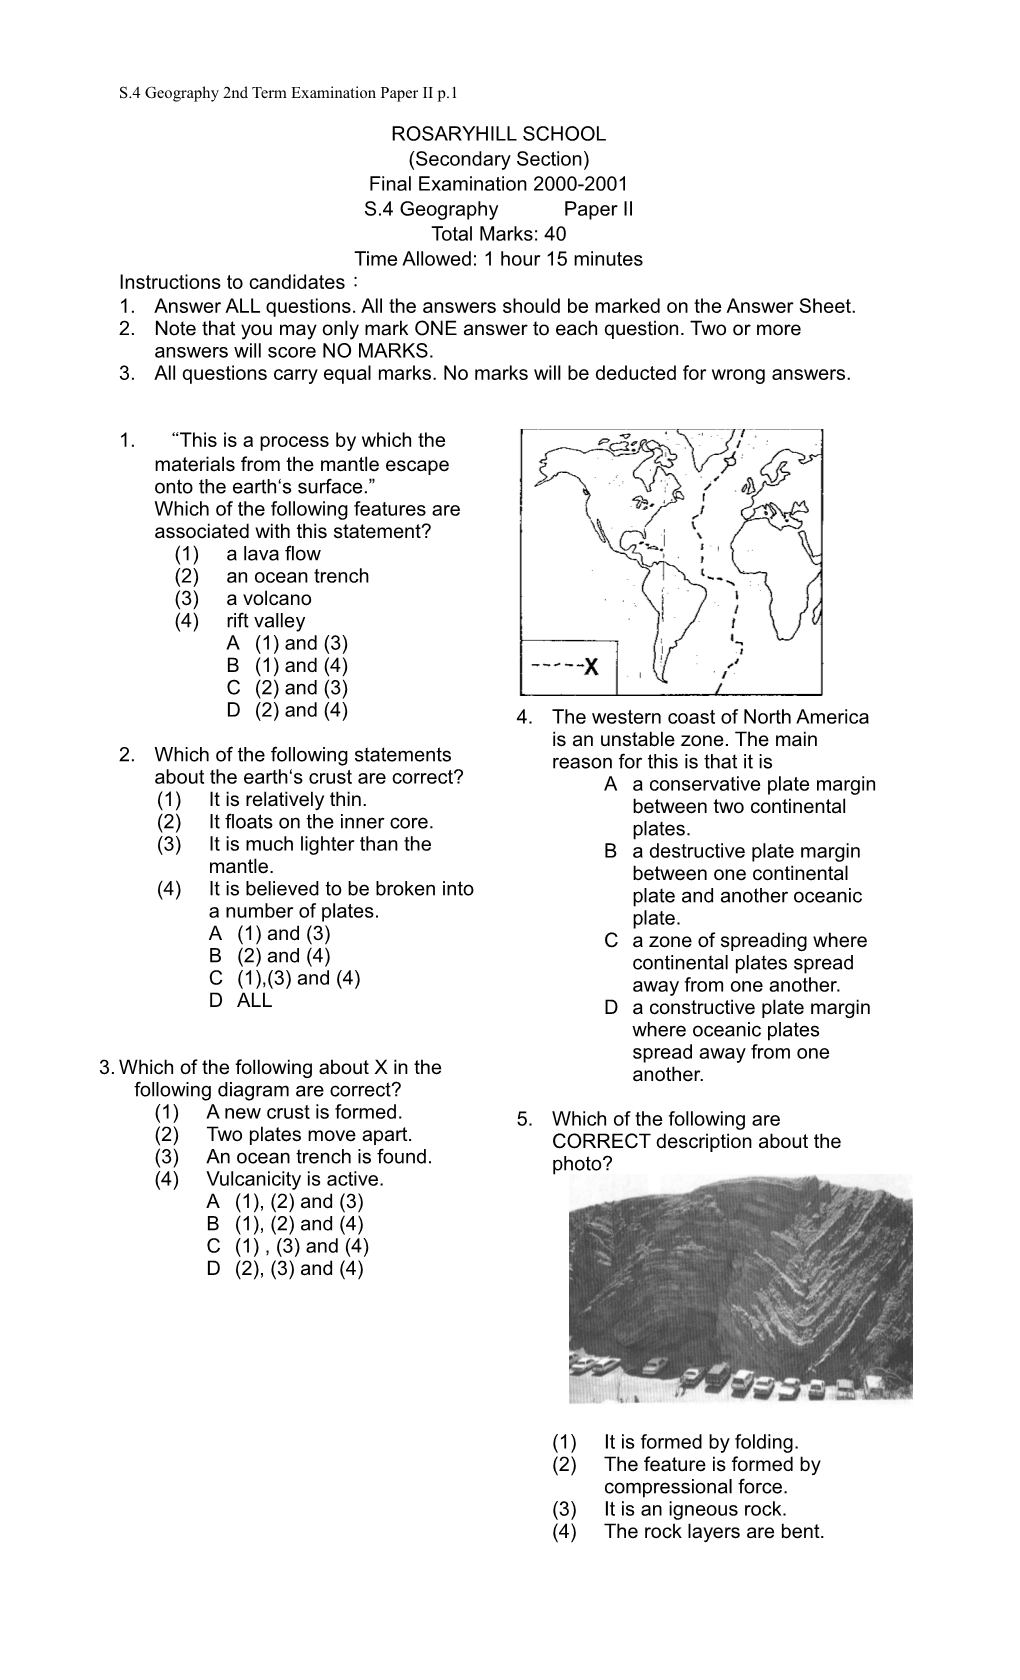 S.4 Geography 2Nd Term Examination Paper II P.9